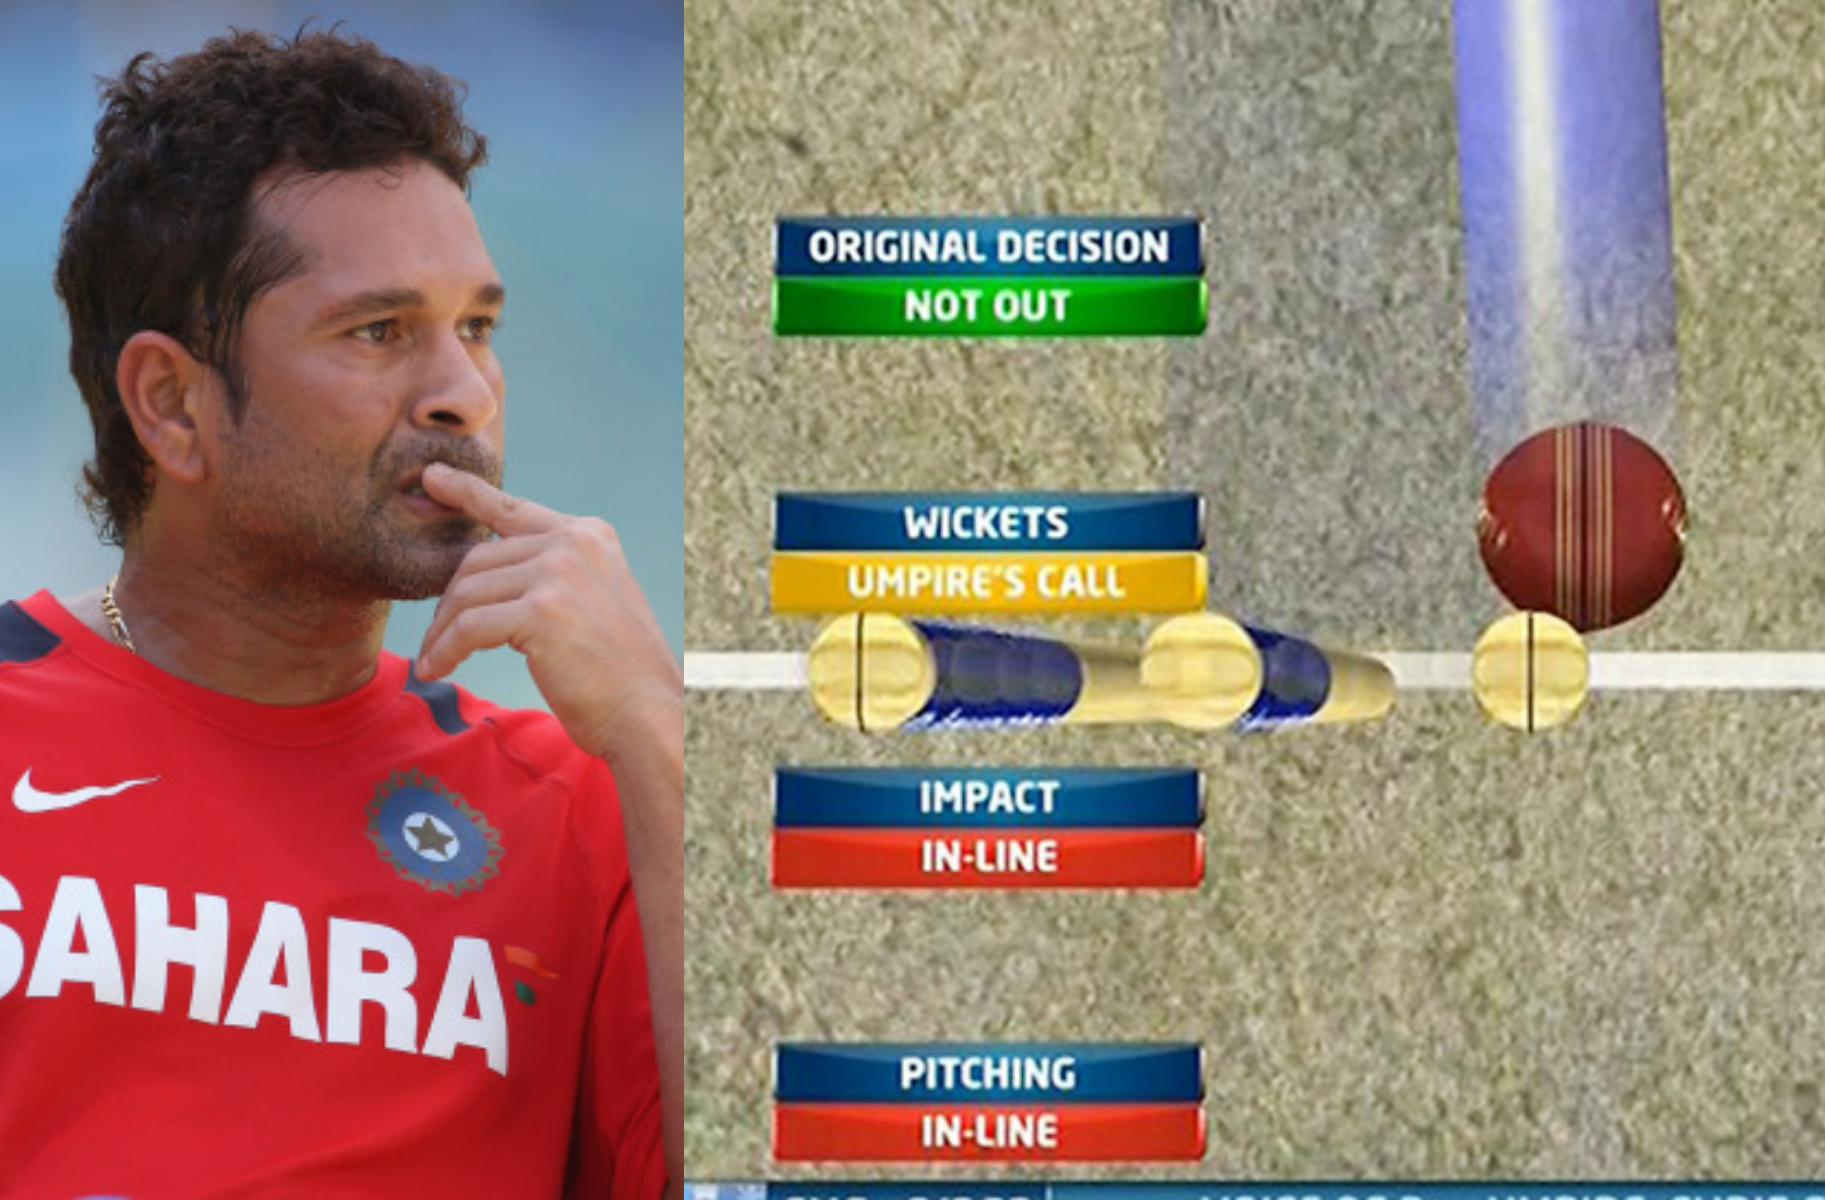 Tendulkar said that umpire's call should be removed from DRS